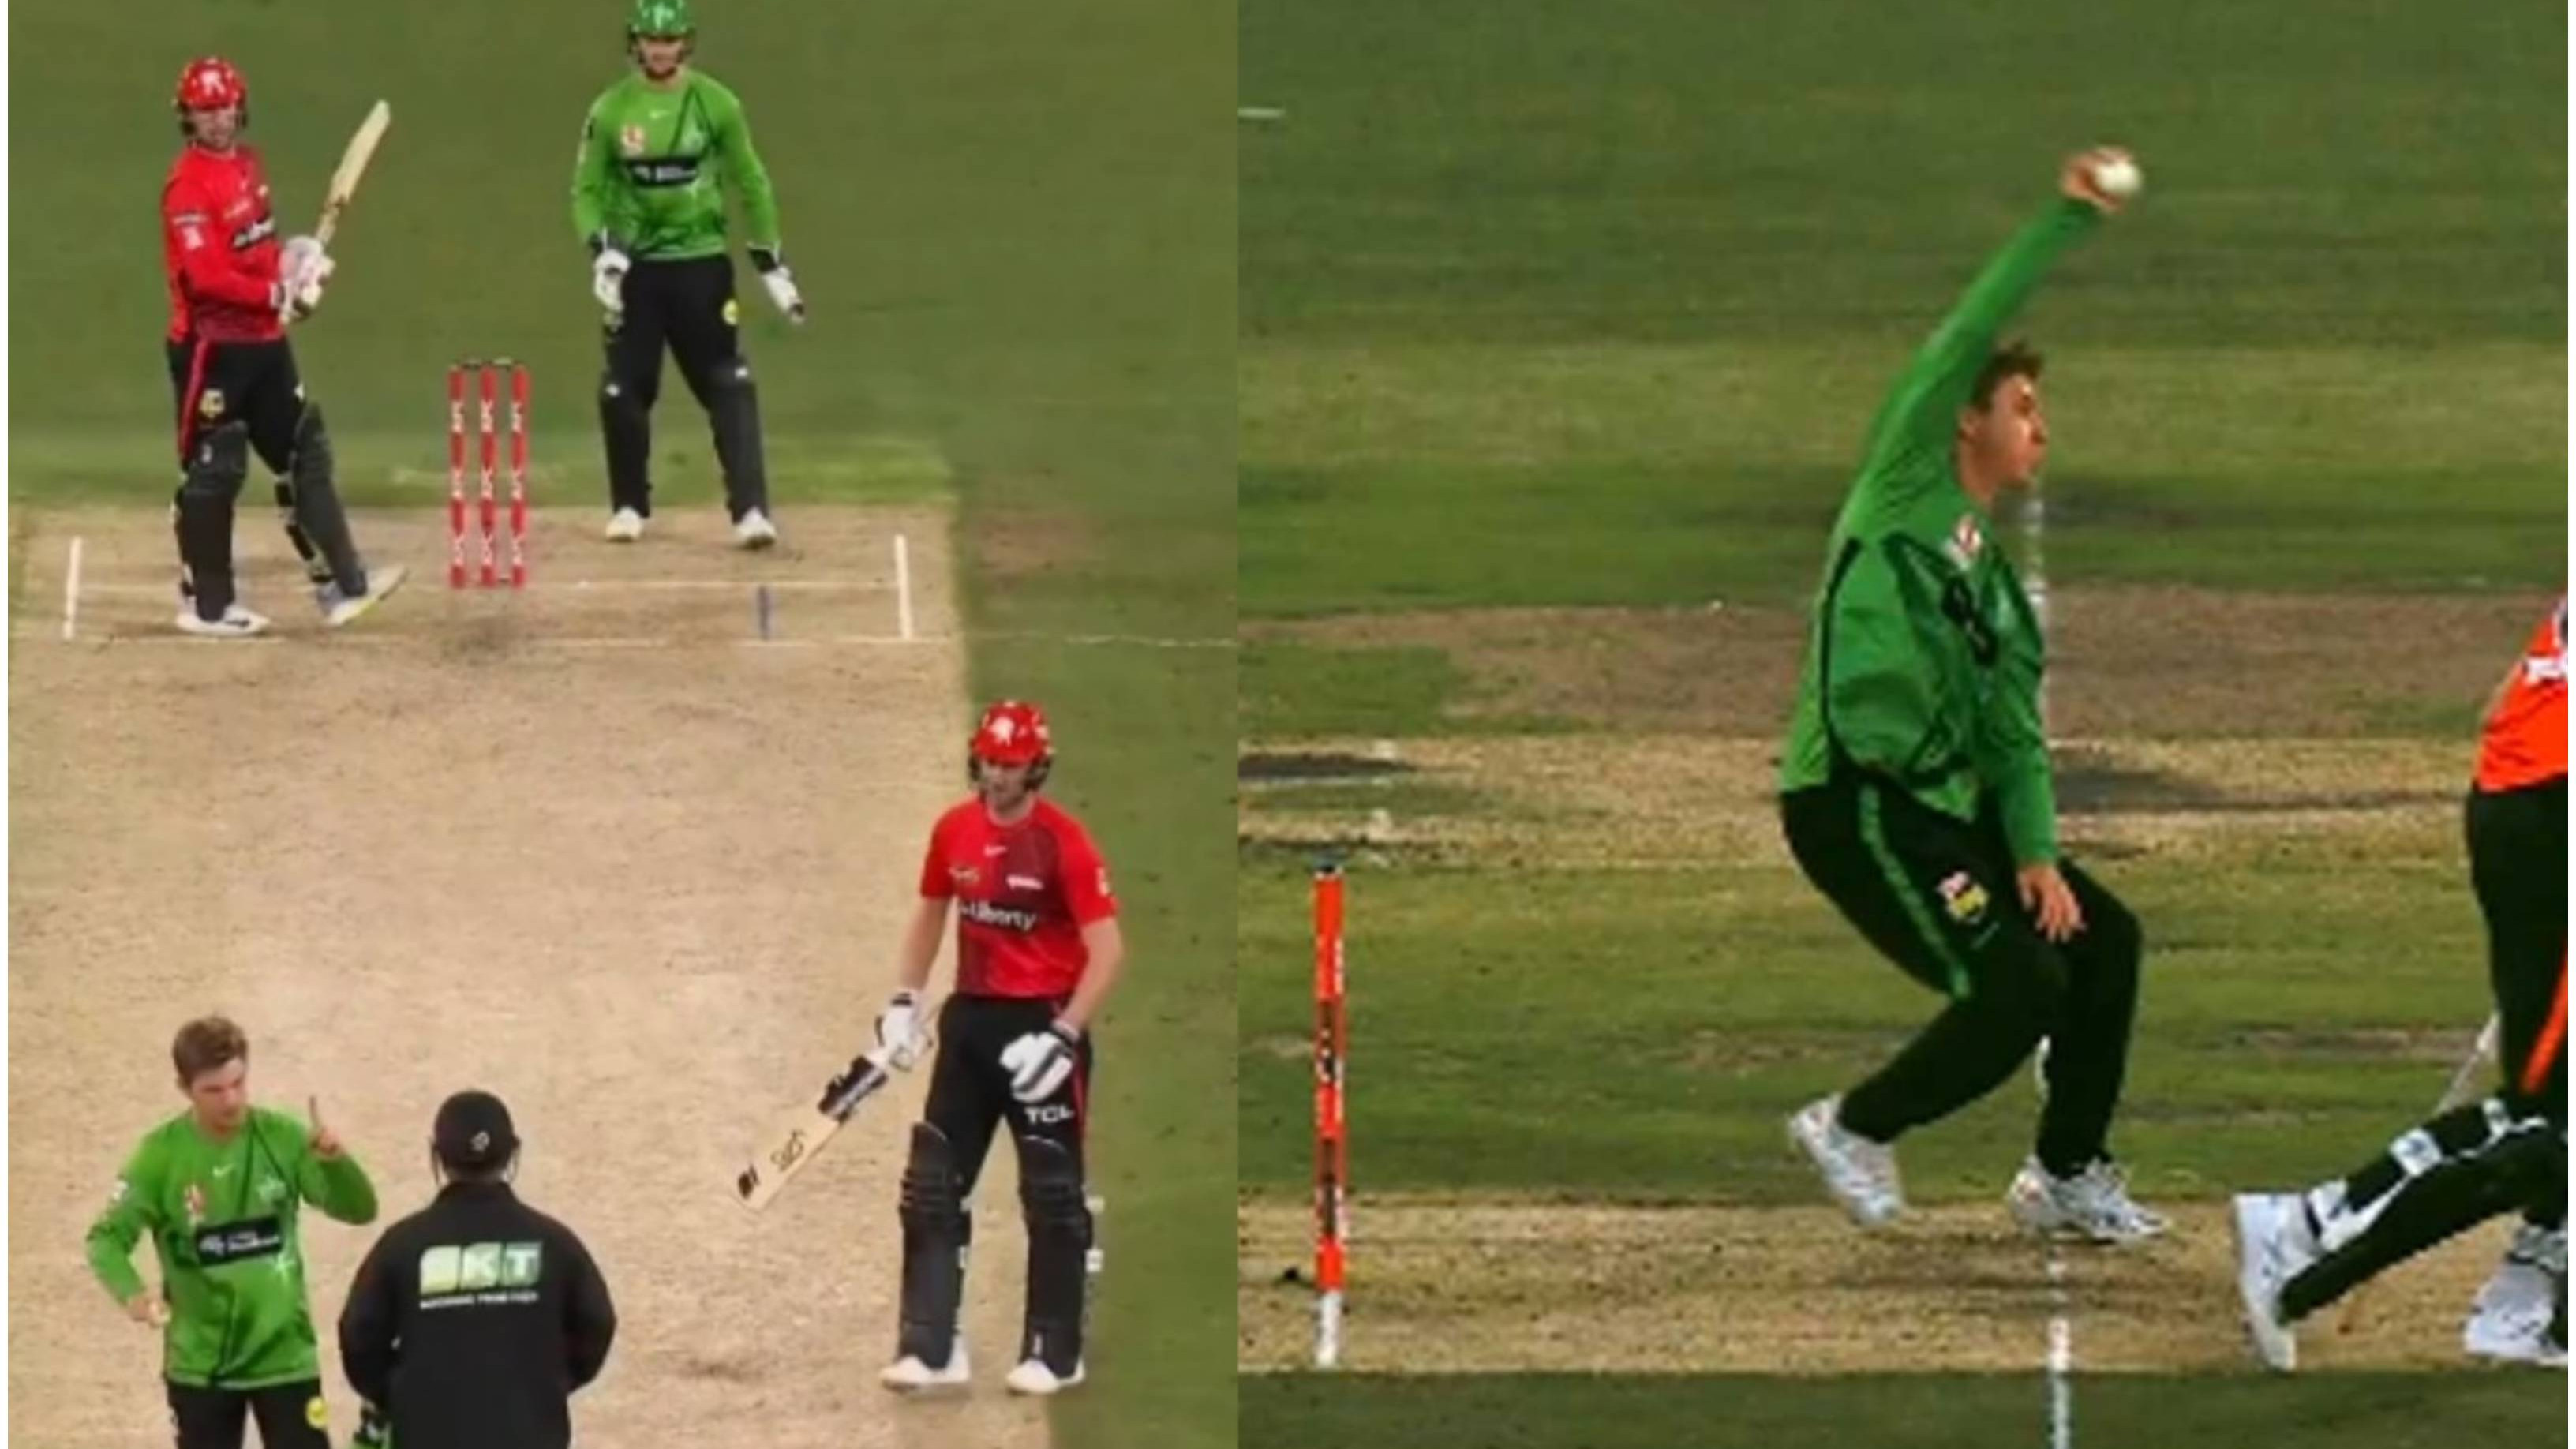 “I was well within my rights to do it,” says Adam Zampa after attempting run out at non-striker's end during a BBL 12 game